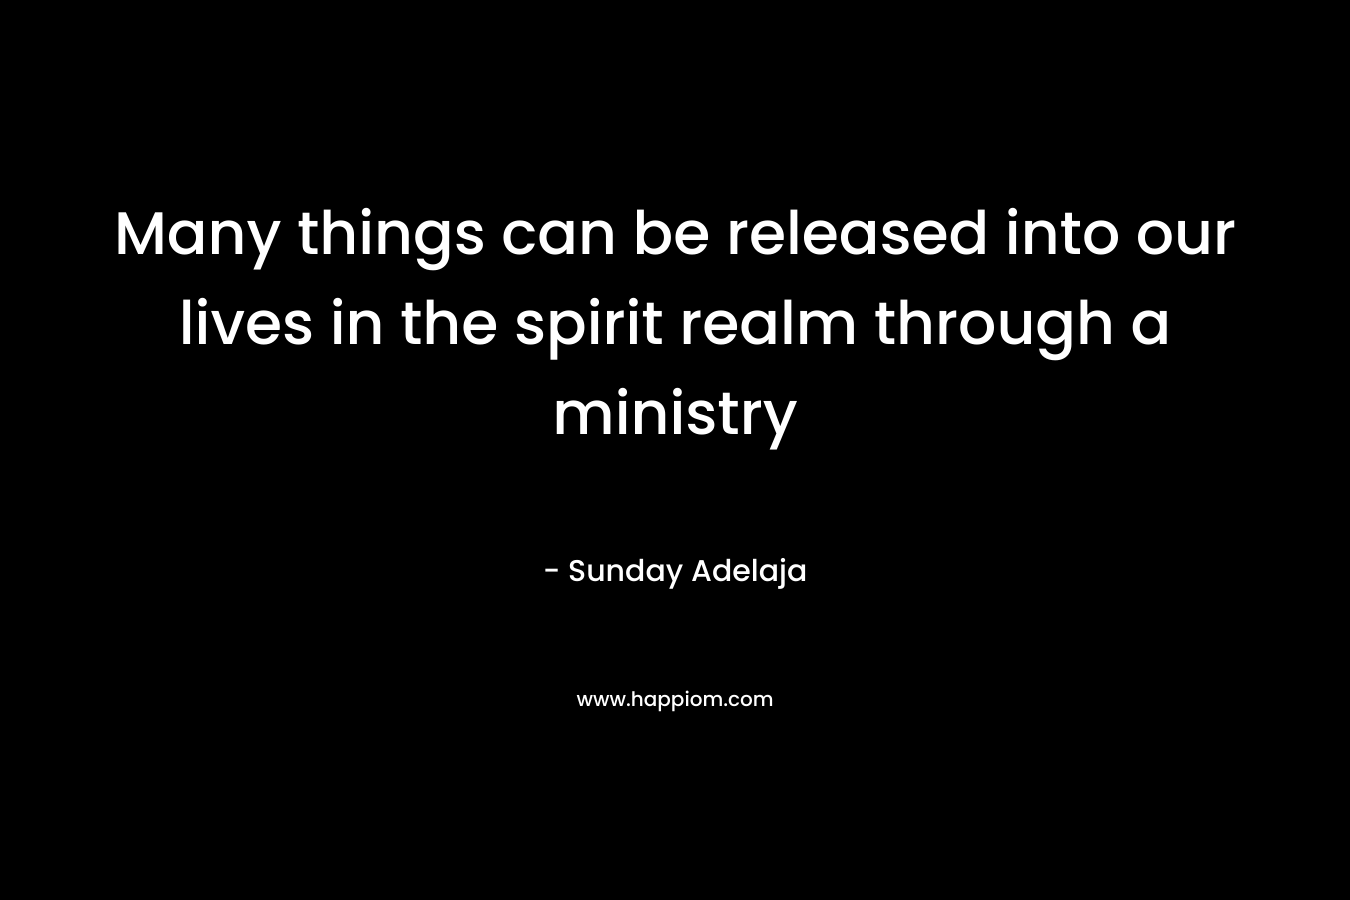 Many things can be released into our lives in the spirit realm through a ministry